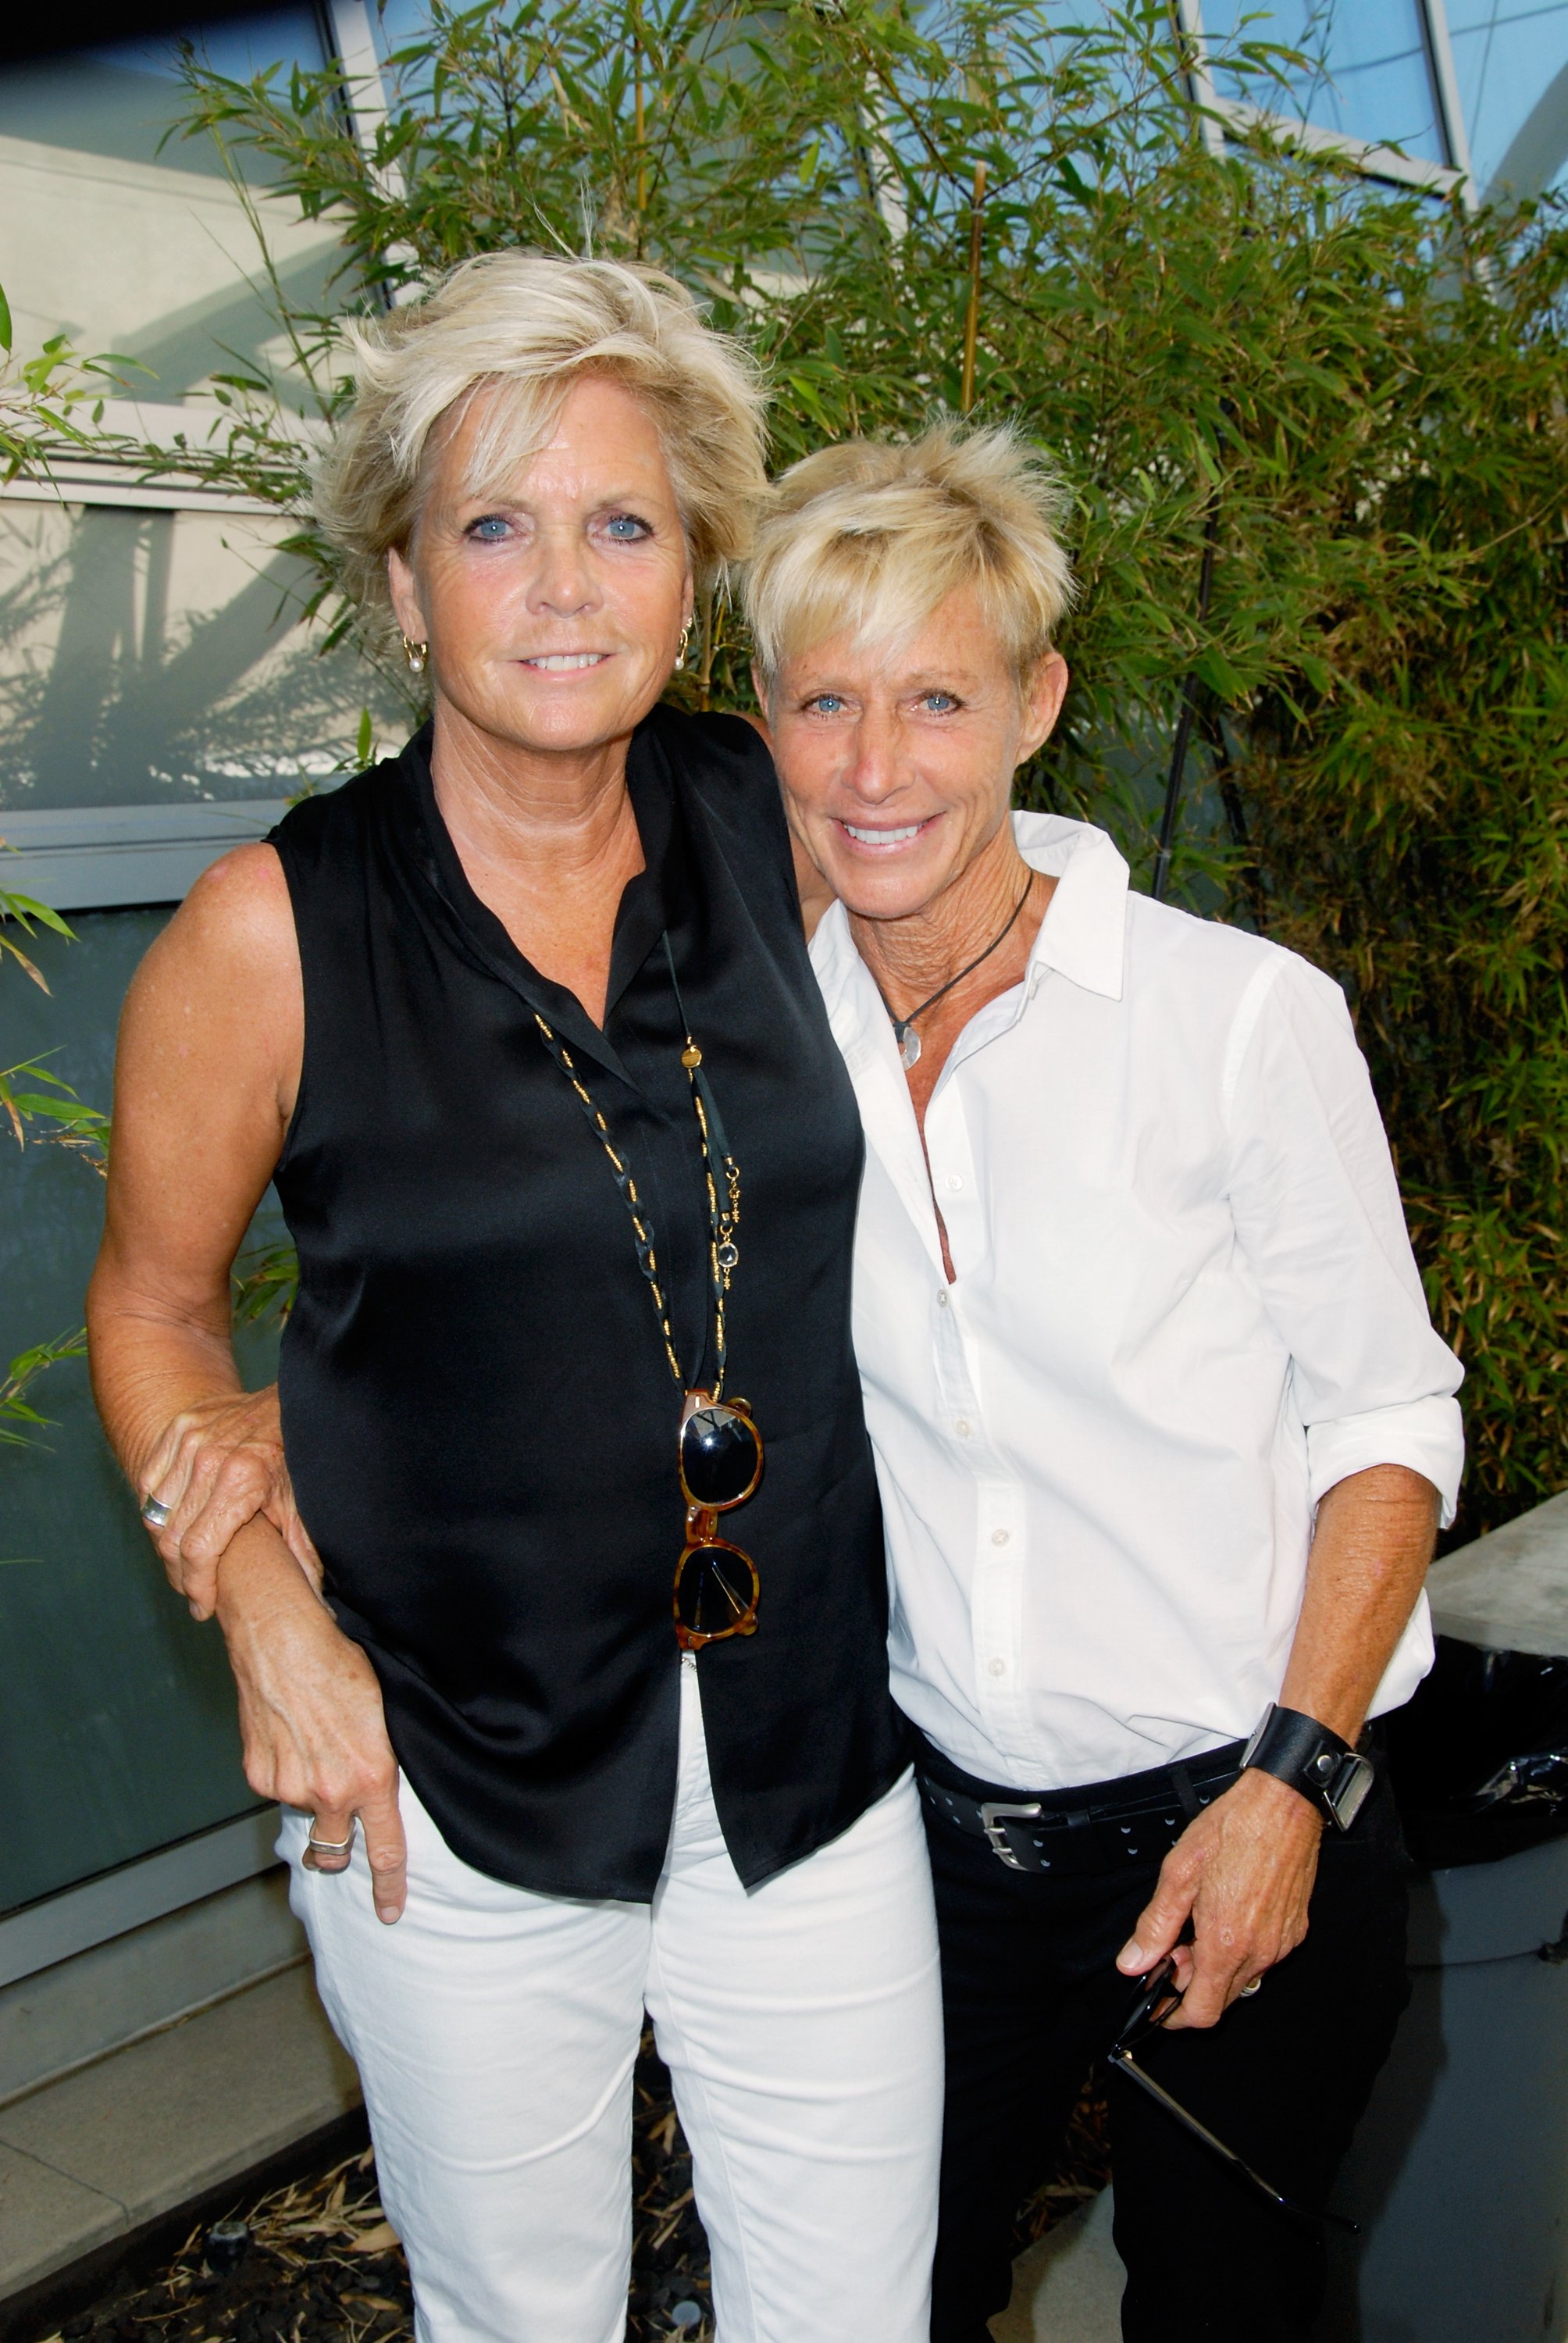 Meredith Baxter and her partner Nancy Locke at the "Outfest VIP Women's Soiree" on June 24, 2012 | Source: Getty Images